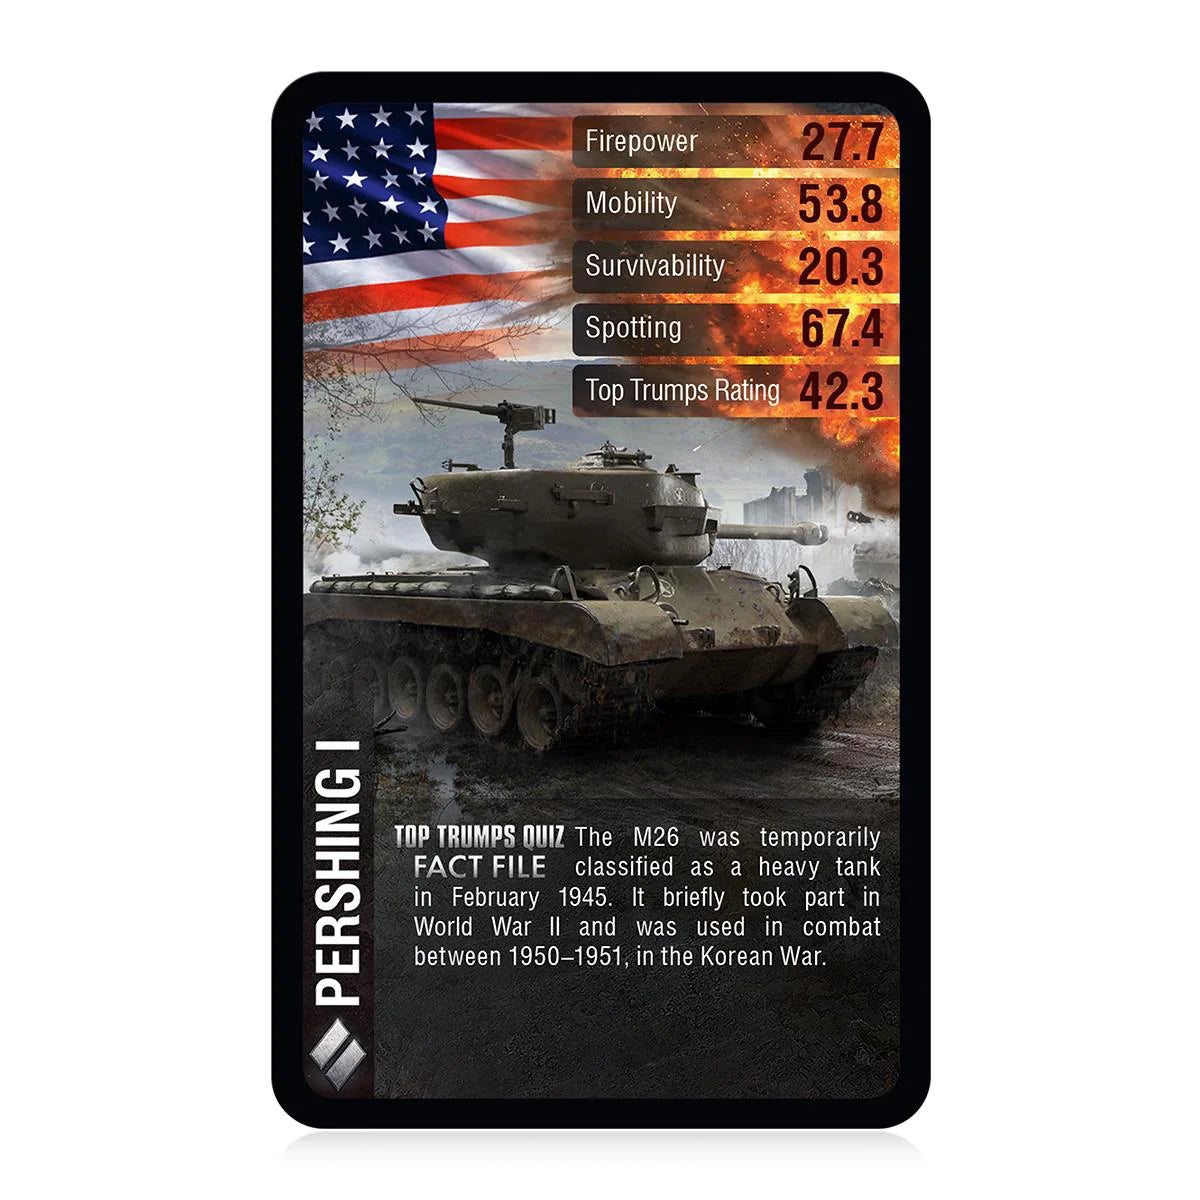 Top Trumps Specials - World of Tanks - Loaded Dice